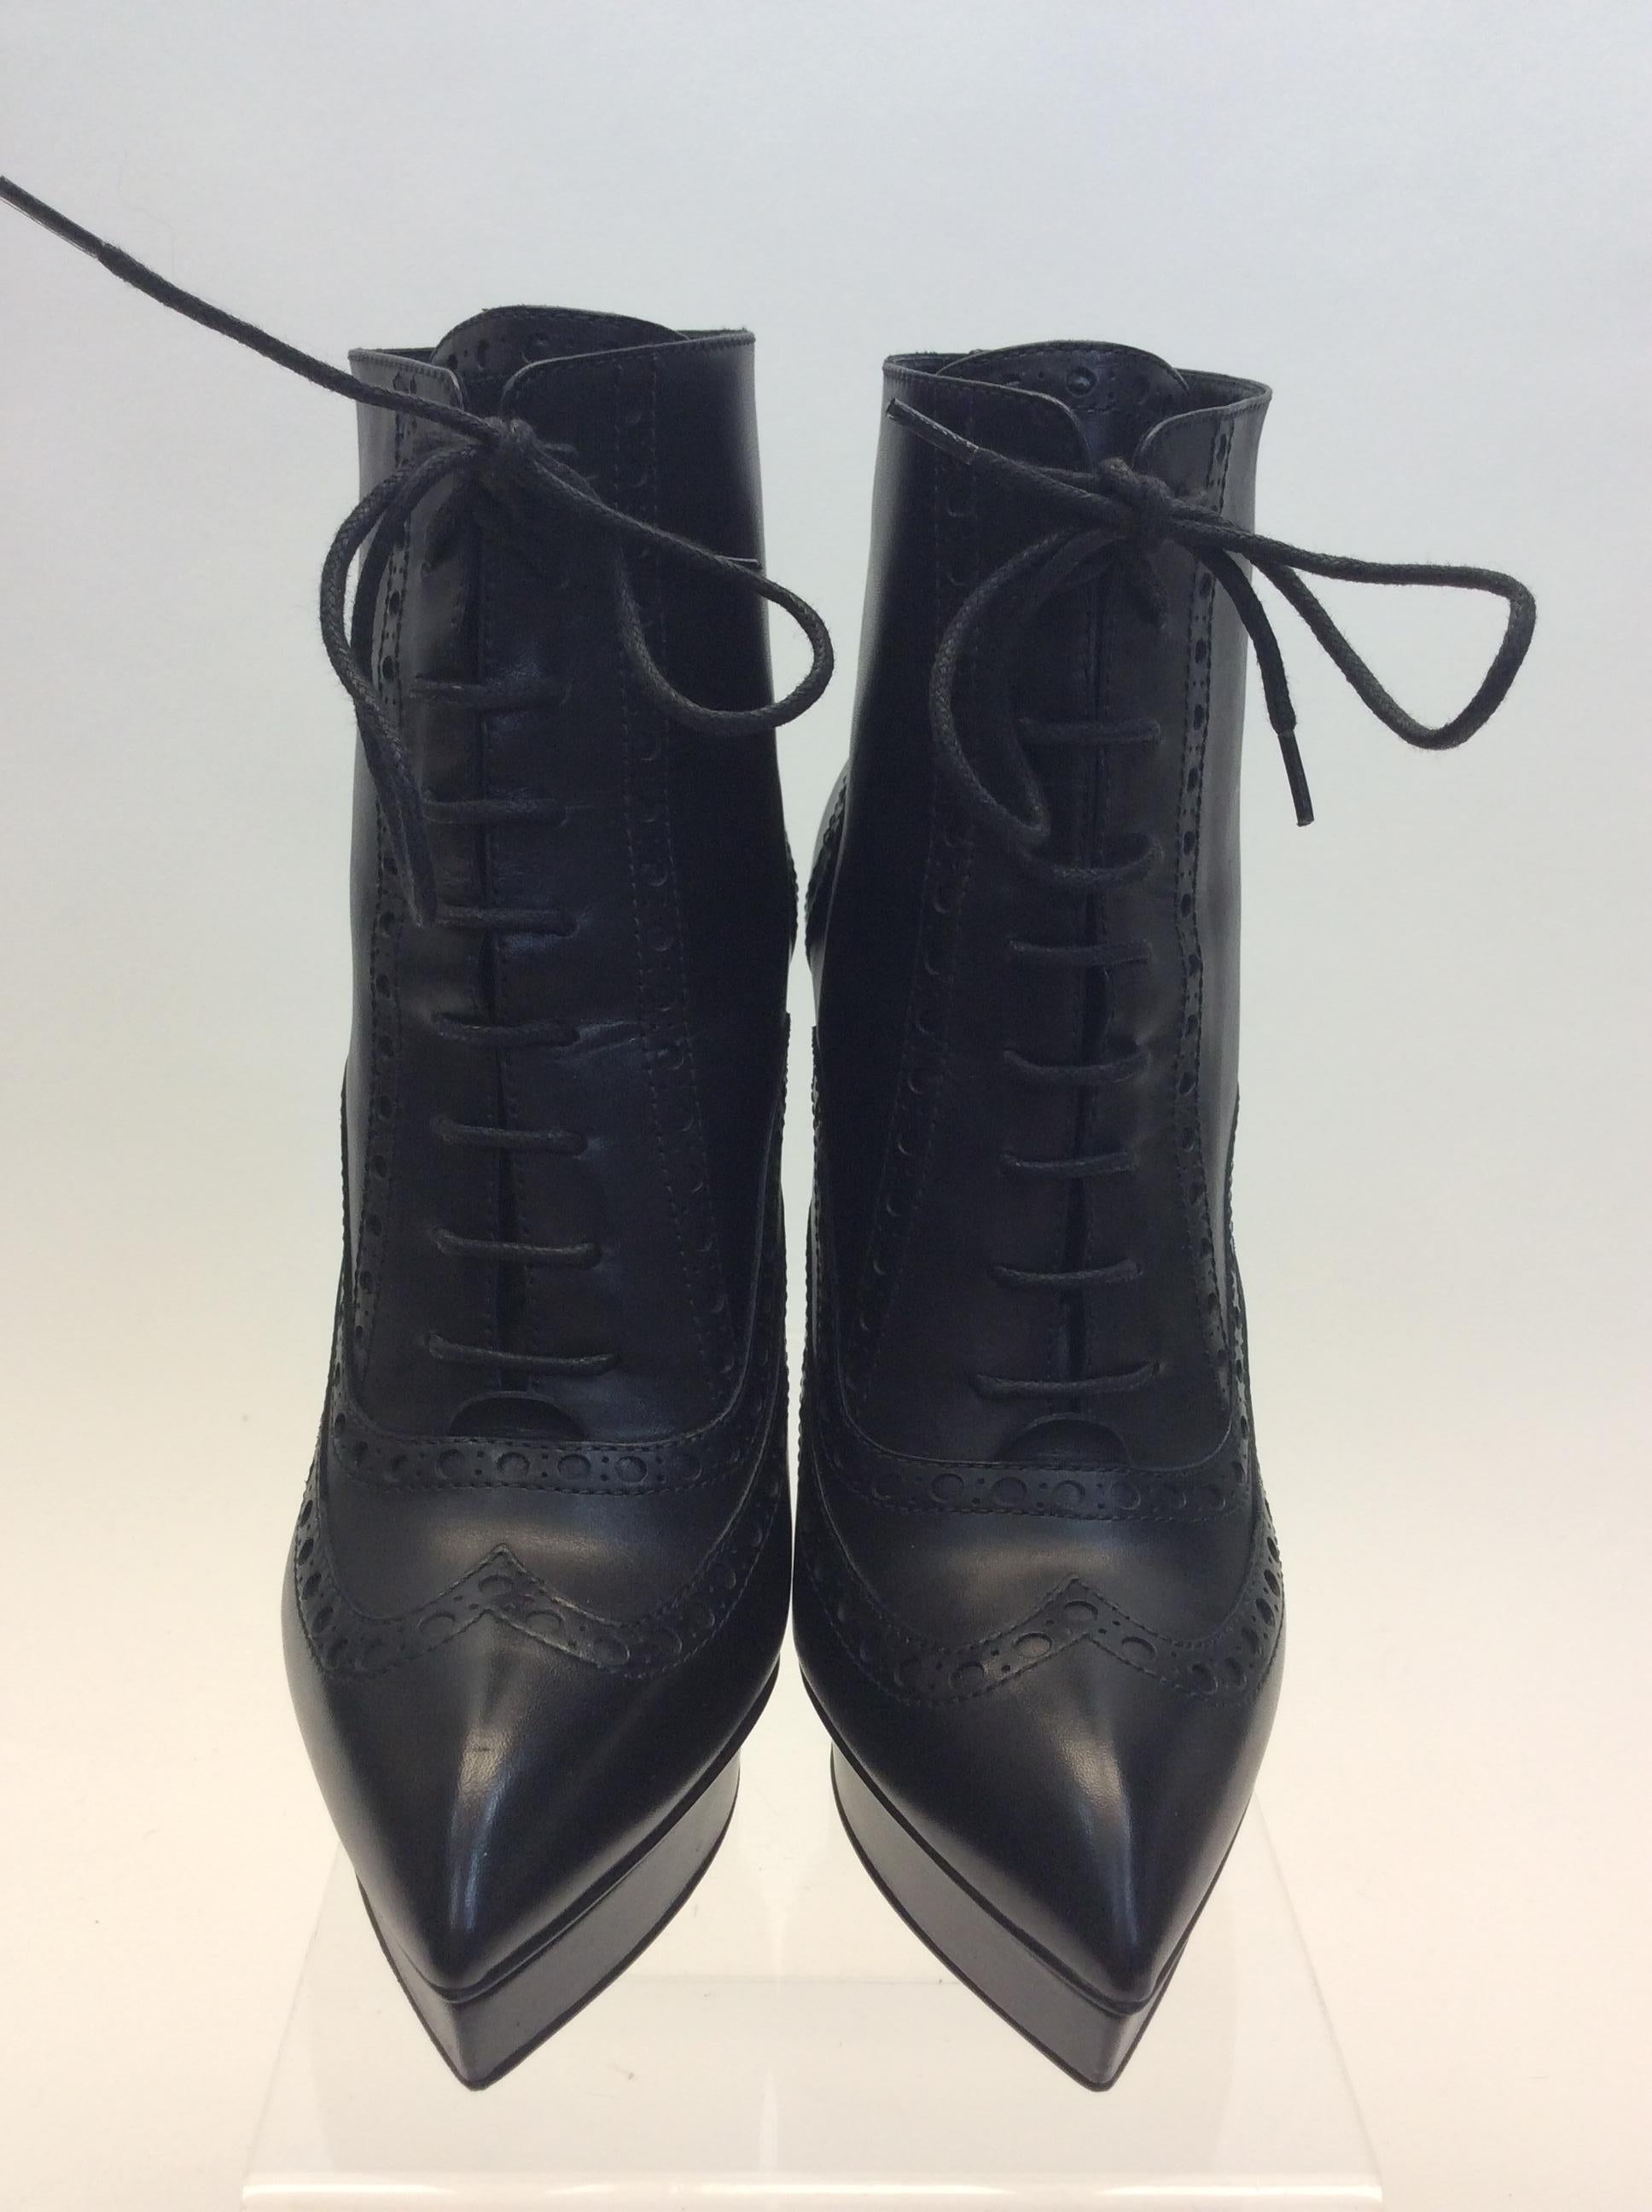 Saint Laurent Black Leather Bootie
$200
Made in Italy
Leather
Size 36.5
1” platform
5” heel